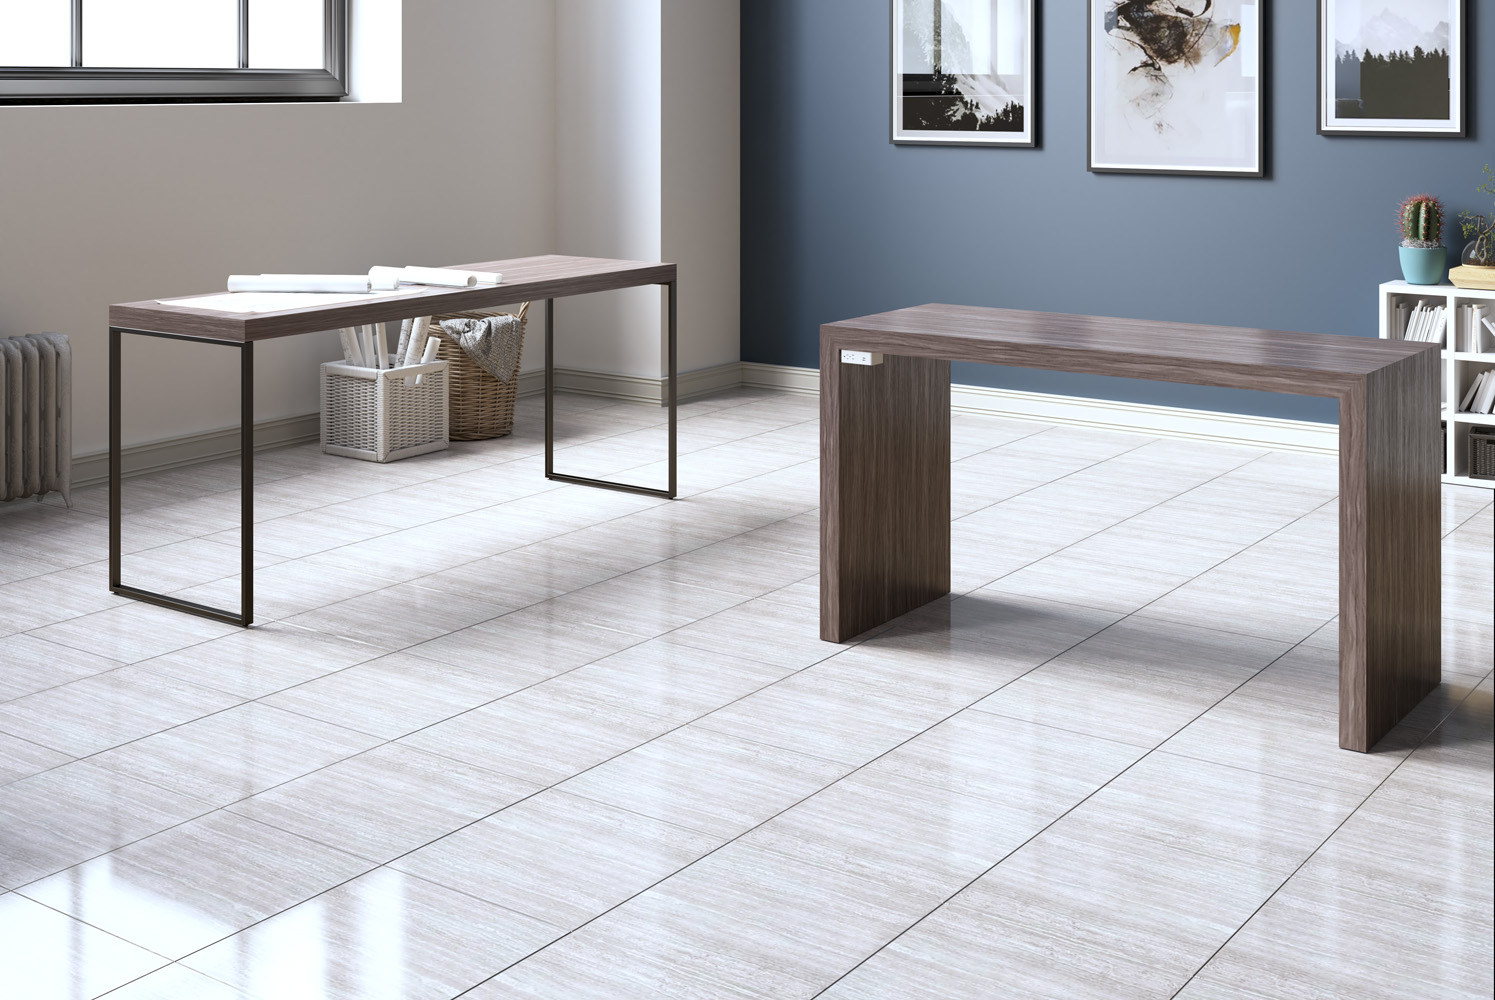 Parma Laminate Panel Table with Parma Metal Legs Table Environment Scene